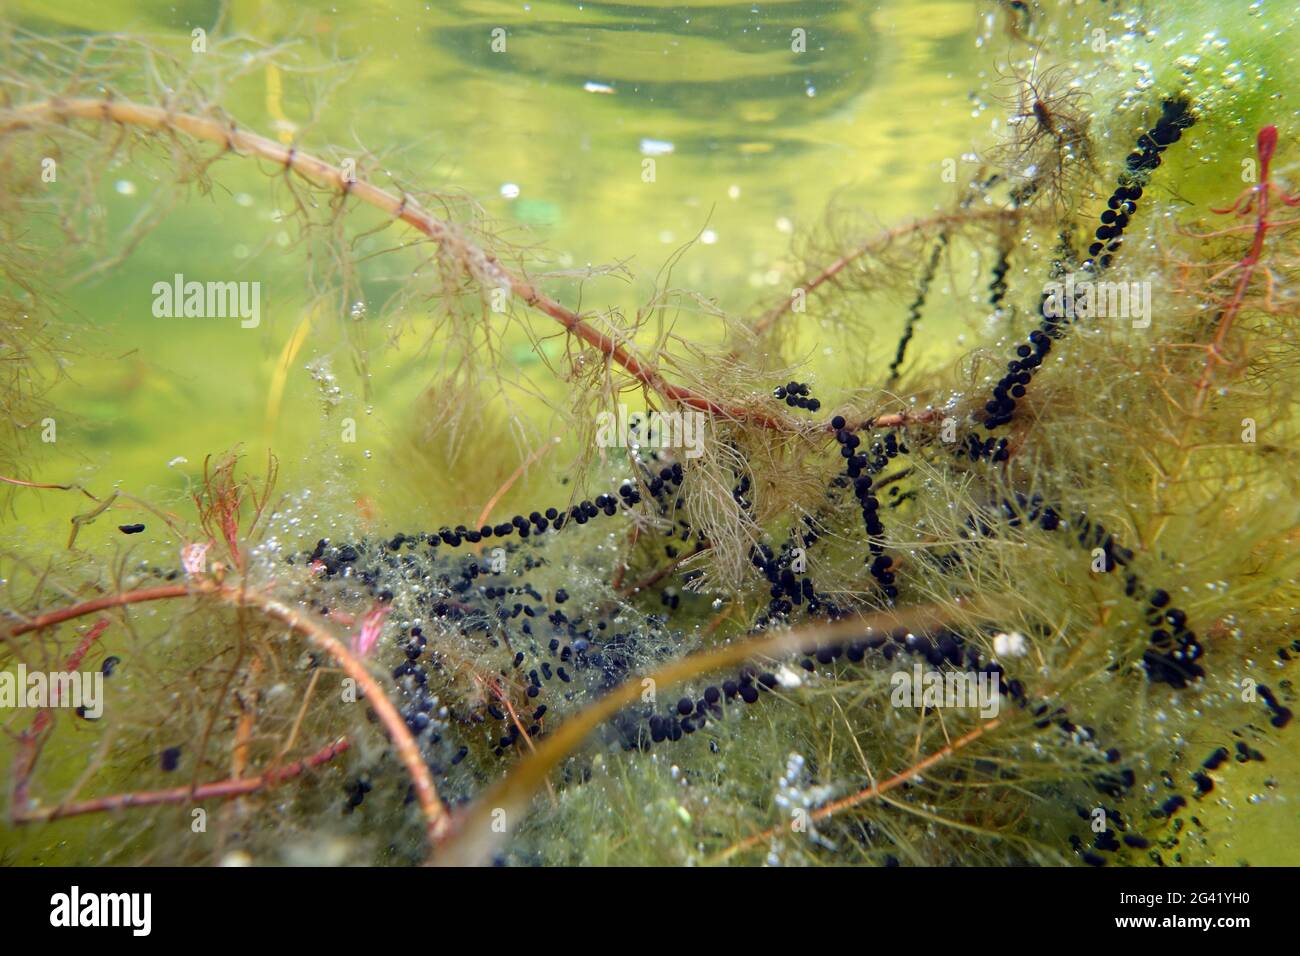 Spawning cords of common toads (Bufo bufo) on spiked water-milfoil (Myriophyllum spicatum) Stock Photo